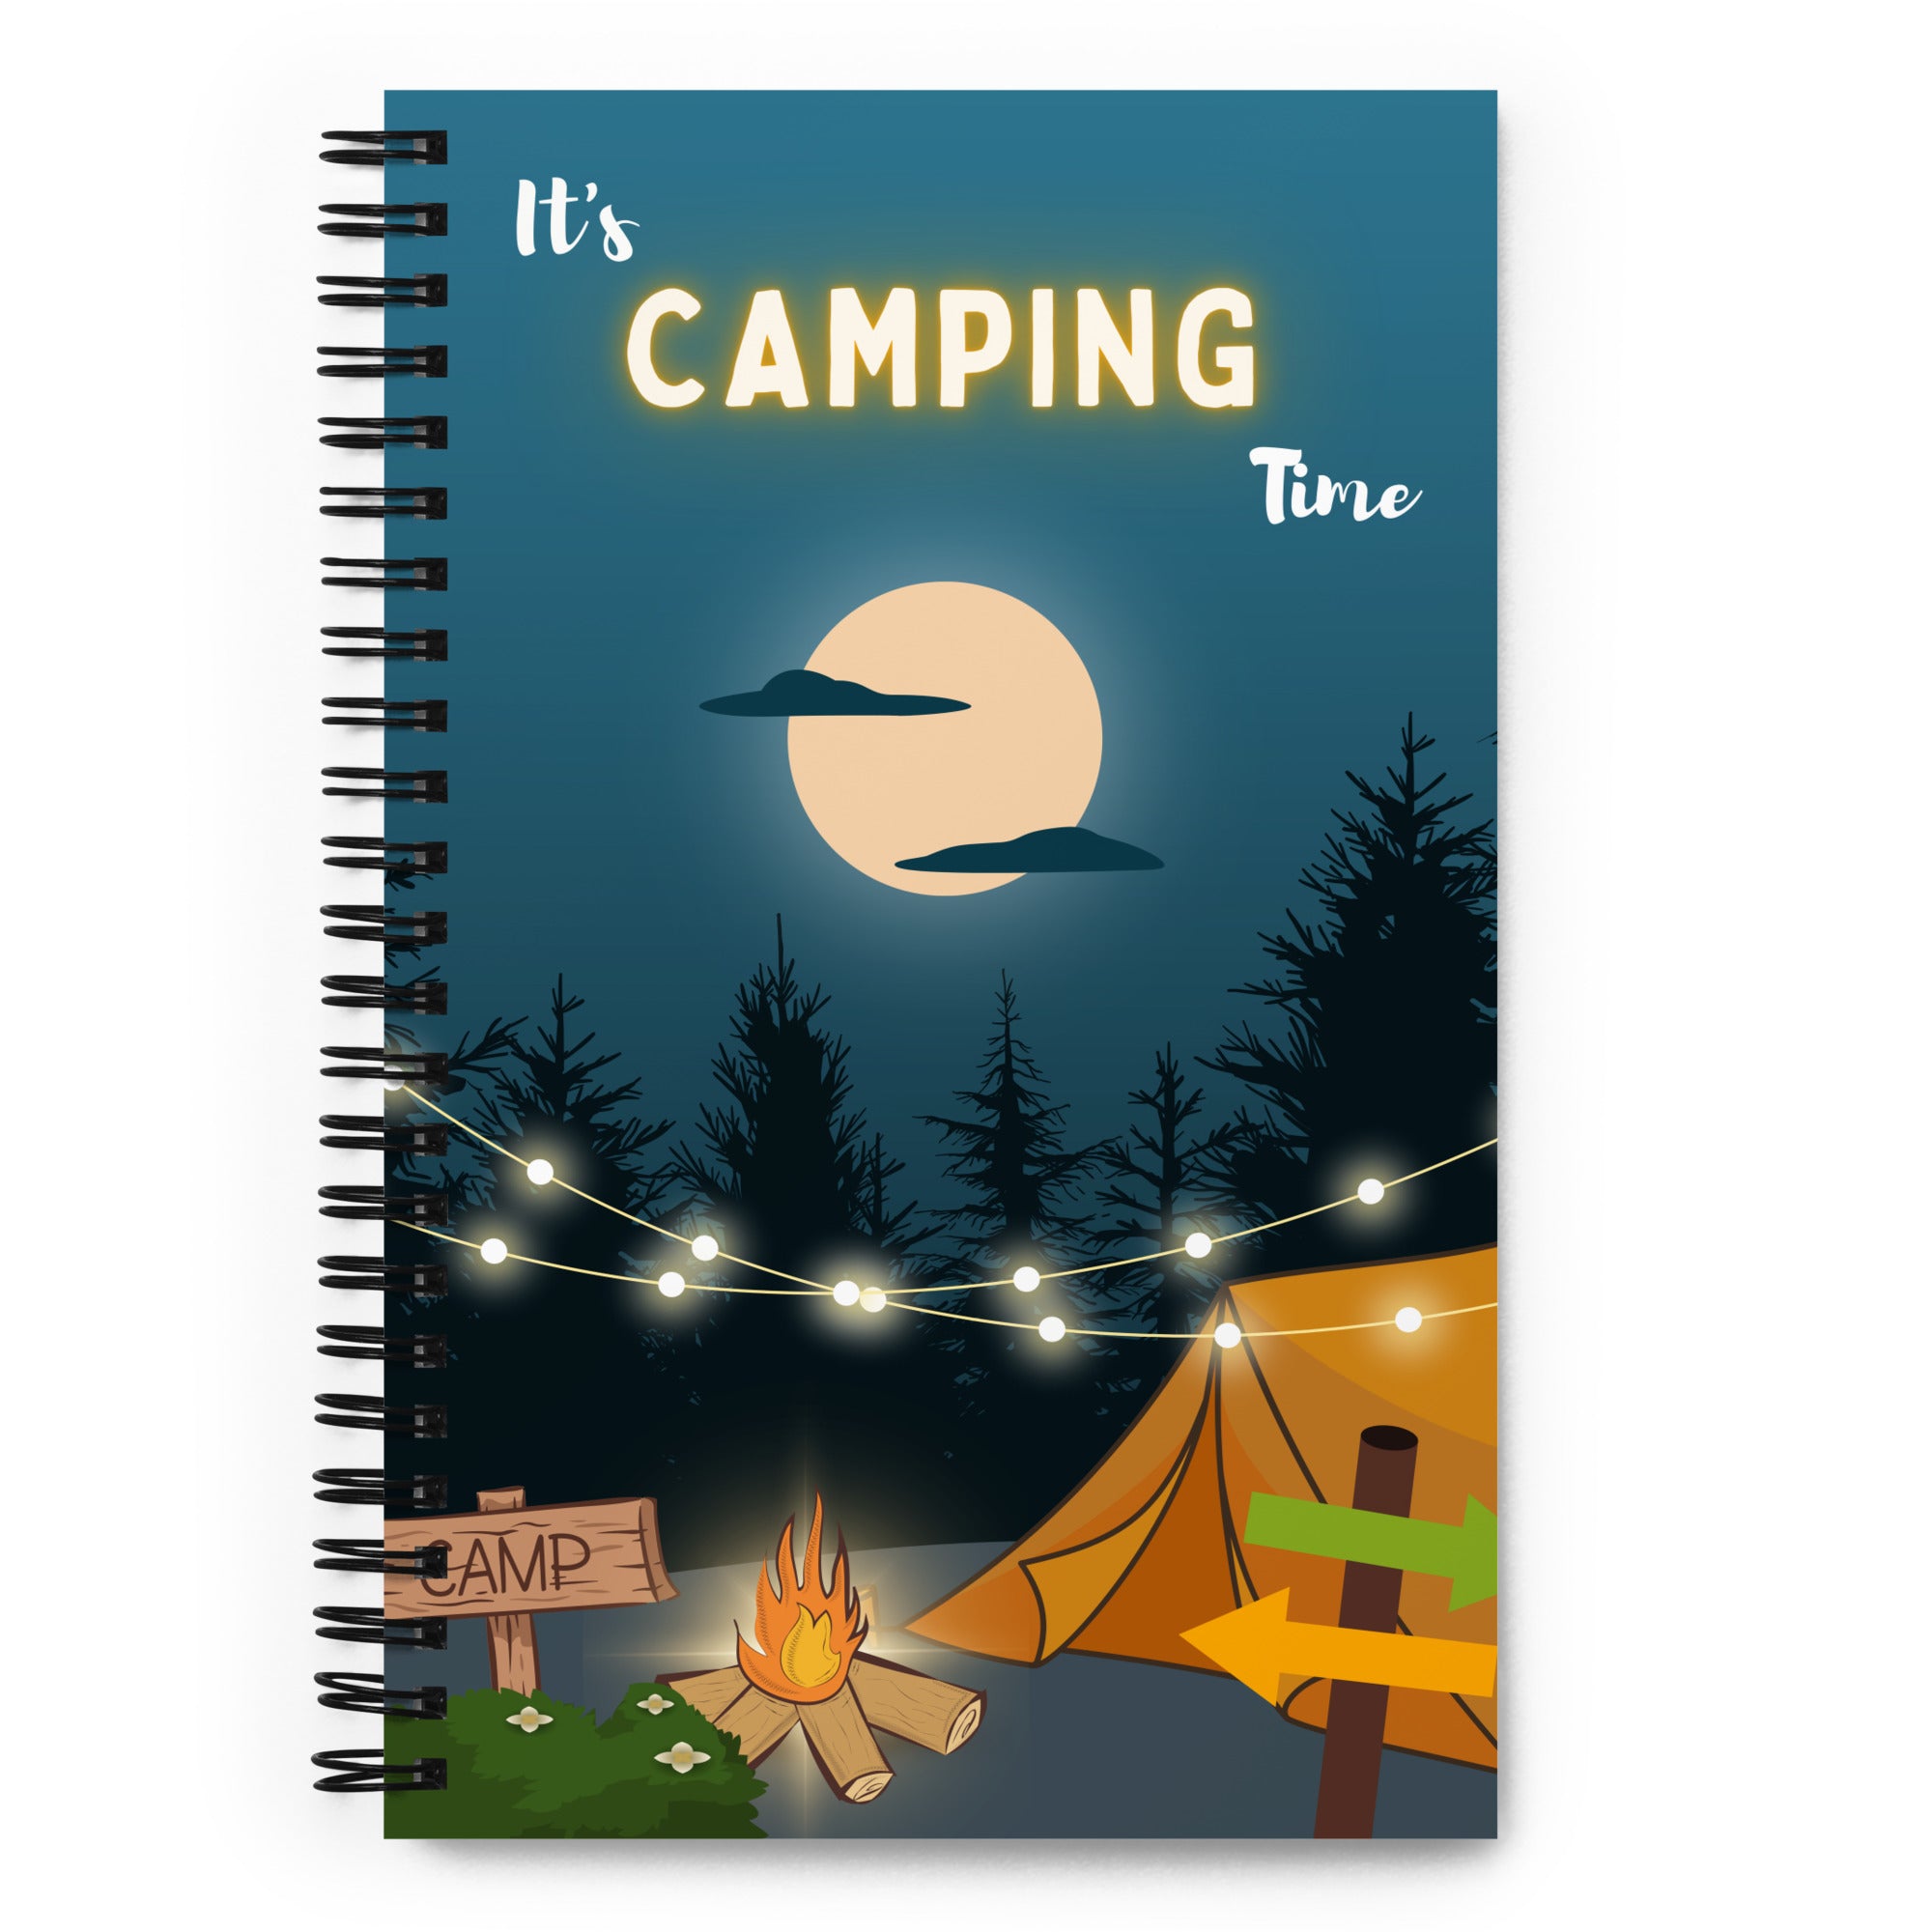 It's Camping Time - Spiral Notebook